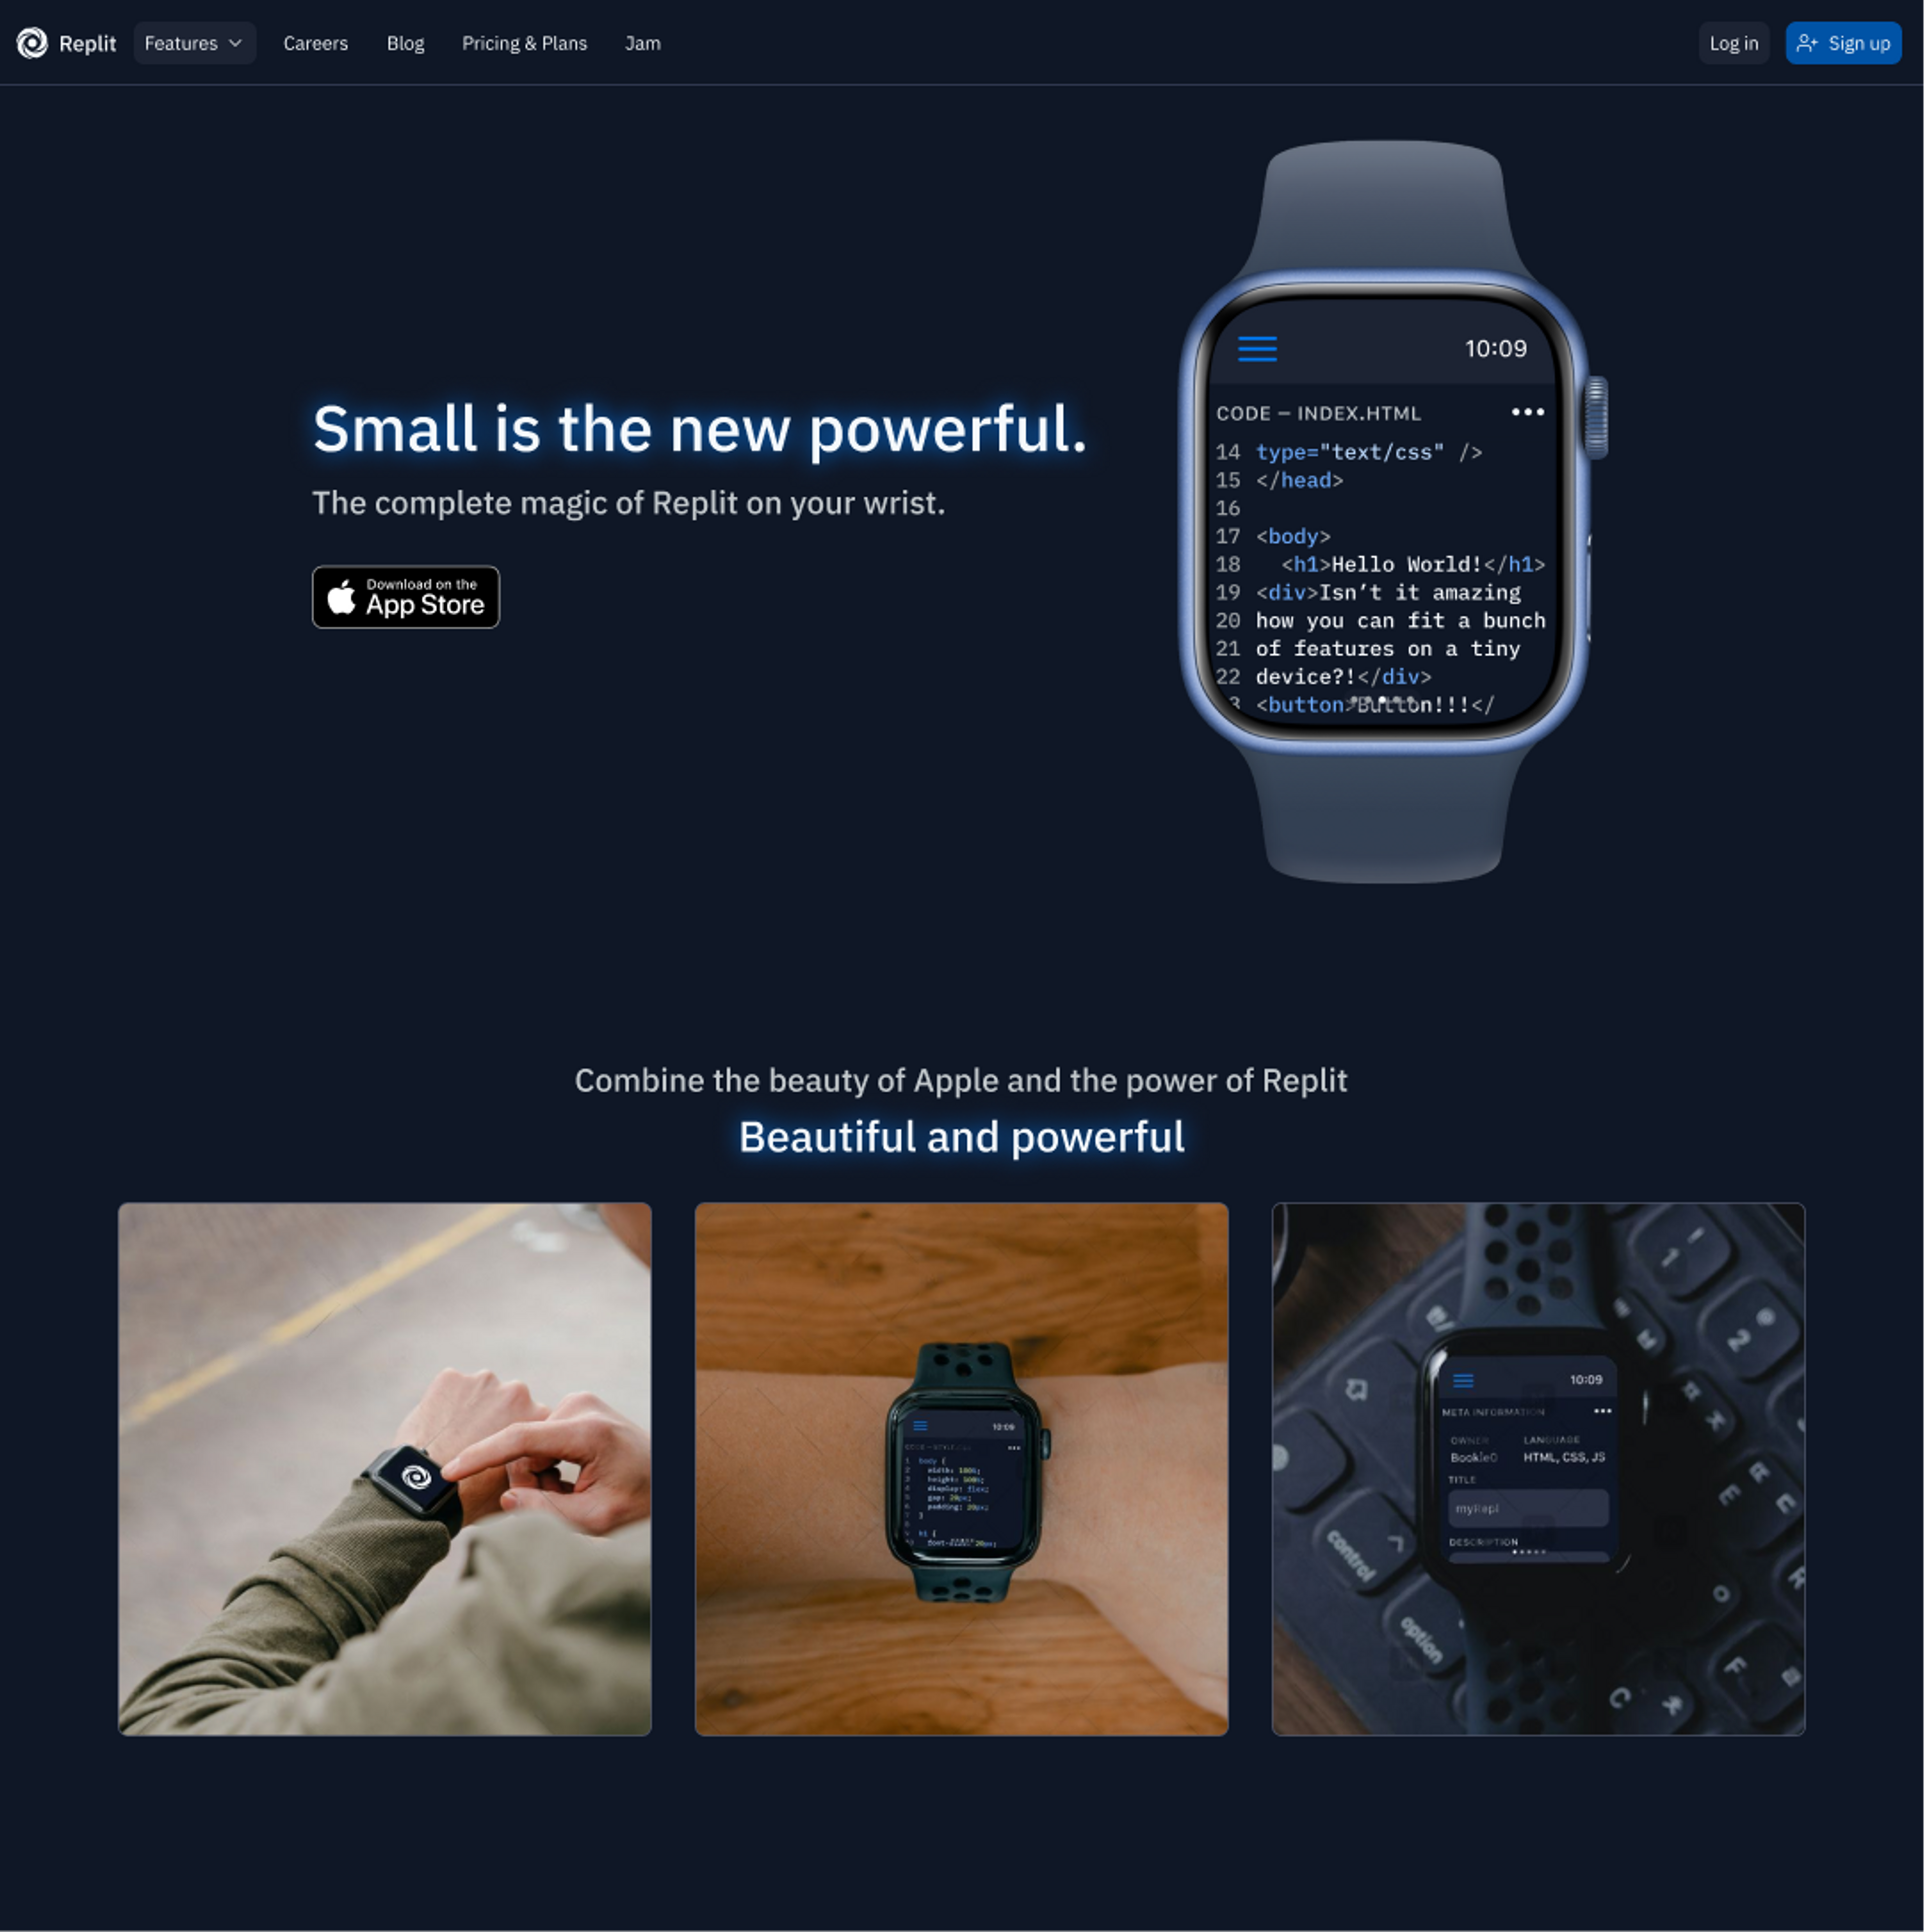 Replit on Apple Watch product page